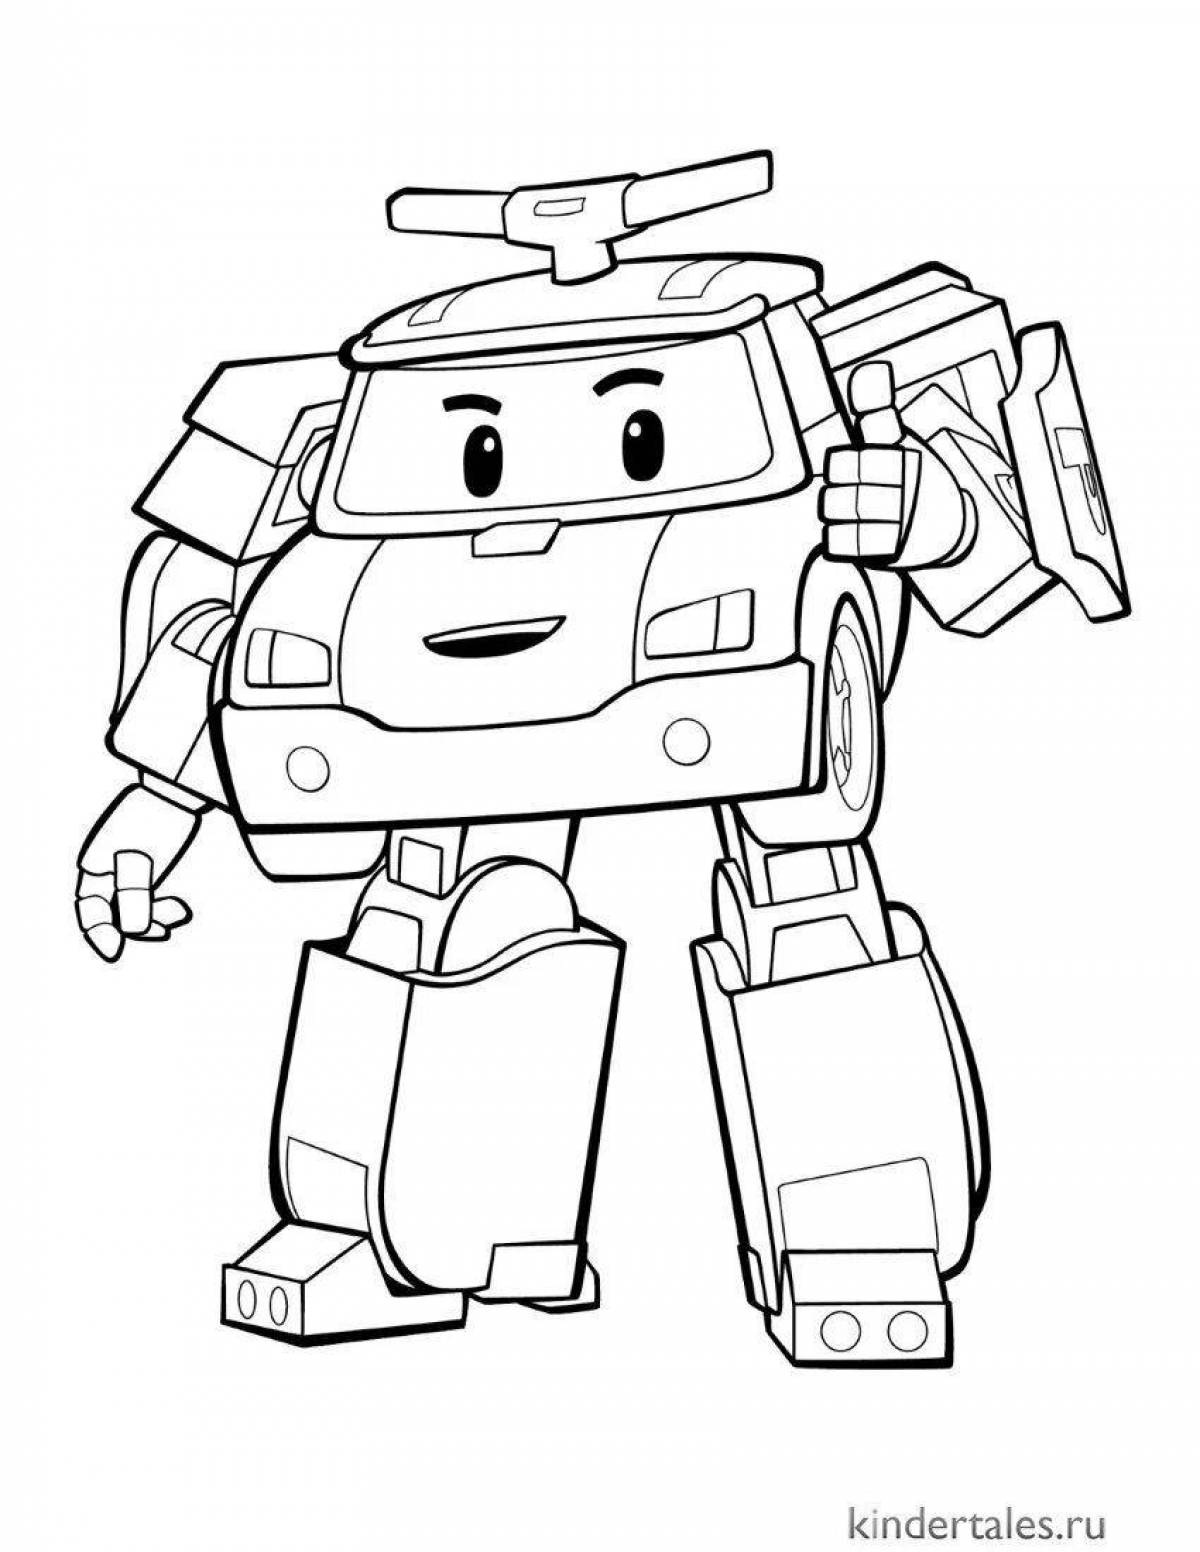 Tobot boys coloring page